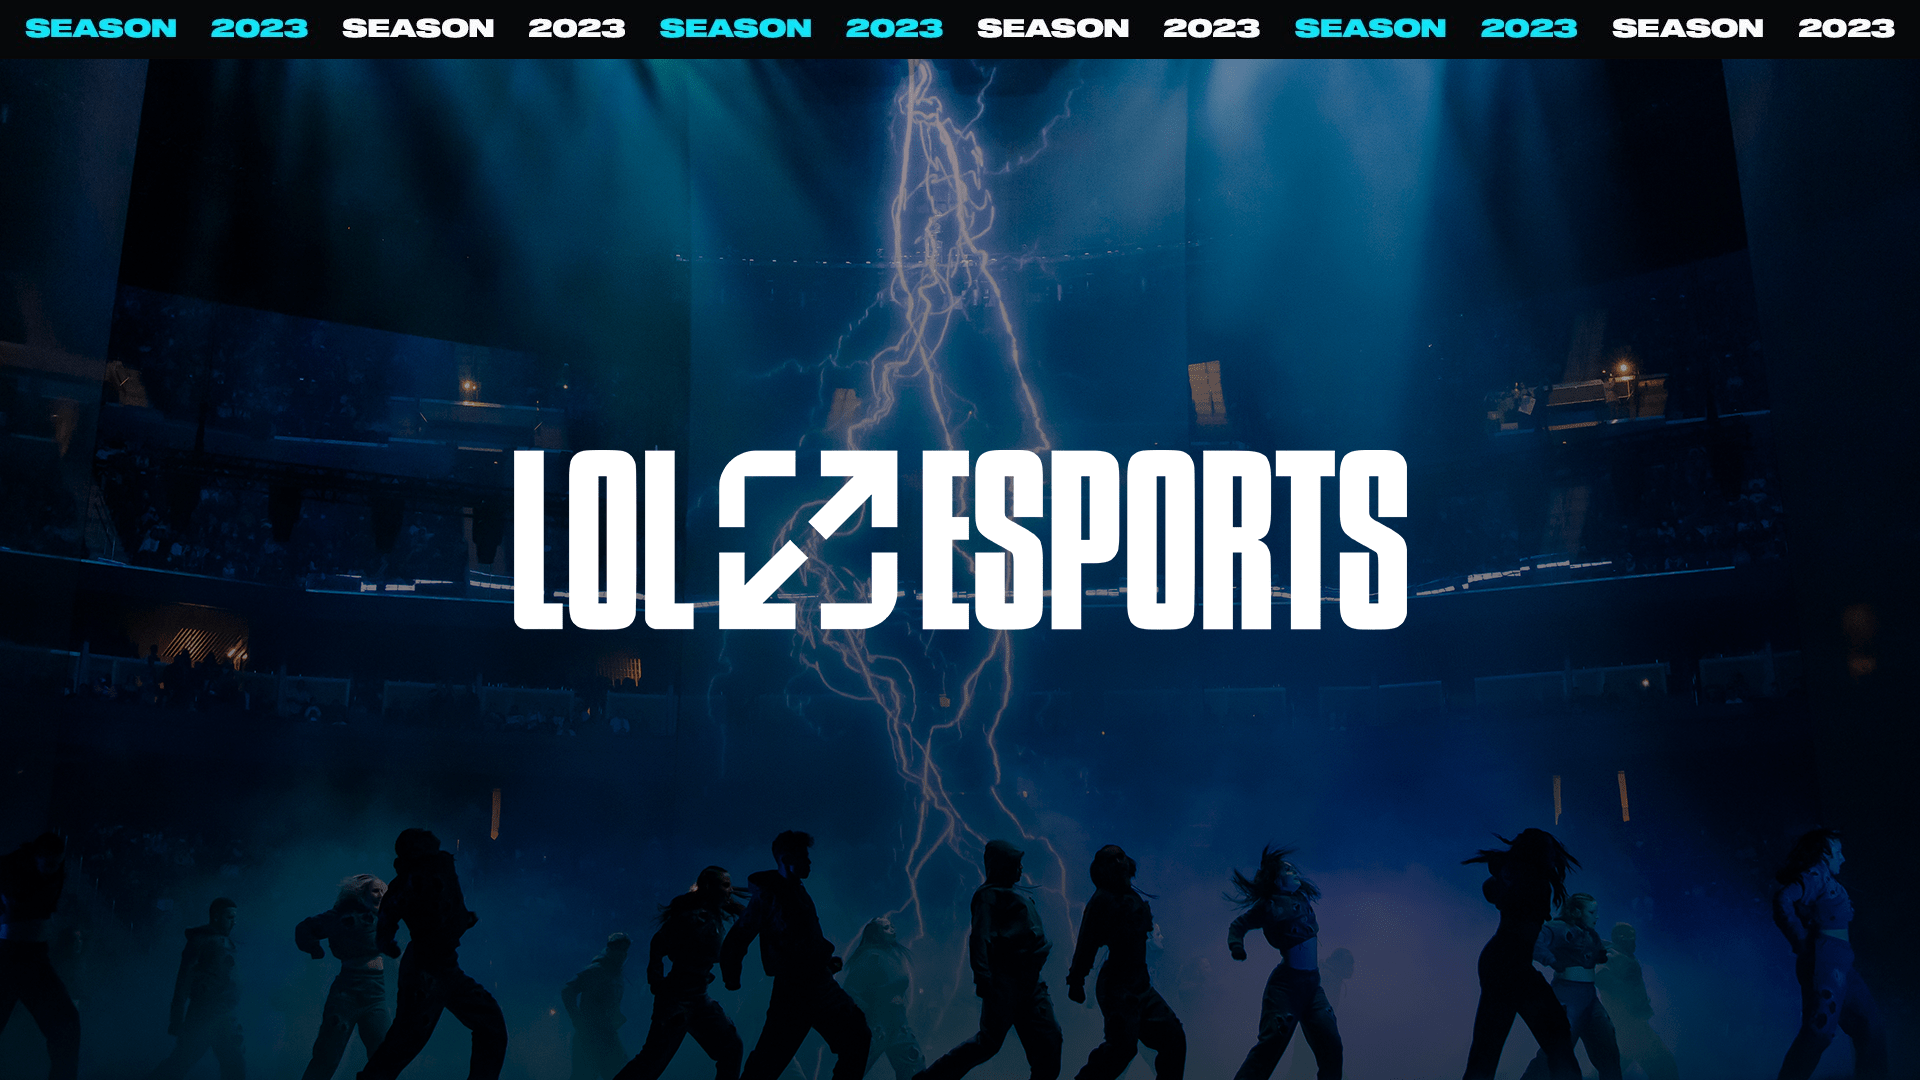 LoL Esports Schedule. LCS, LEC, MSI, League of Legends Games, Matches